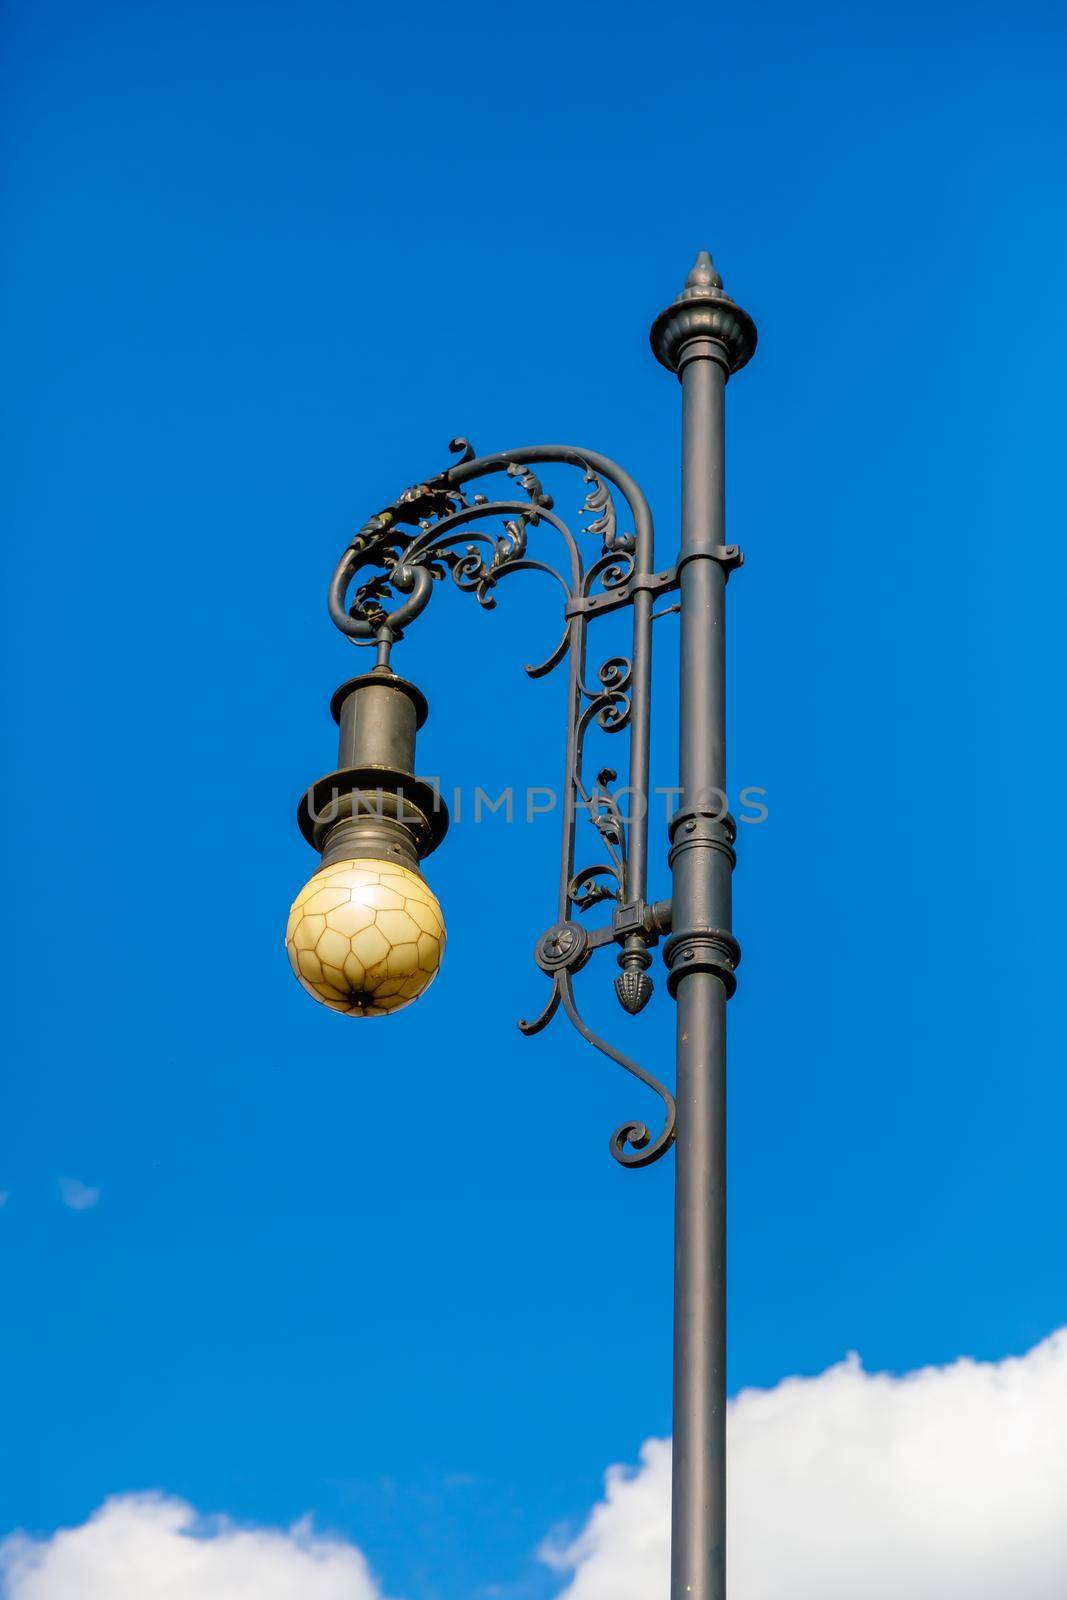 Luxurious antique street lamp made of black metal. Refined style, forging.